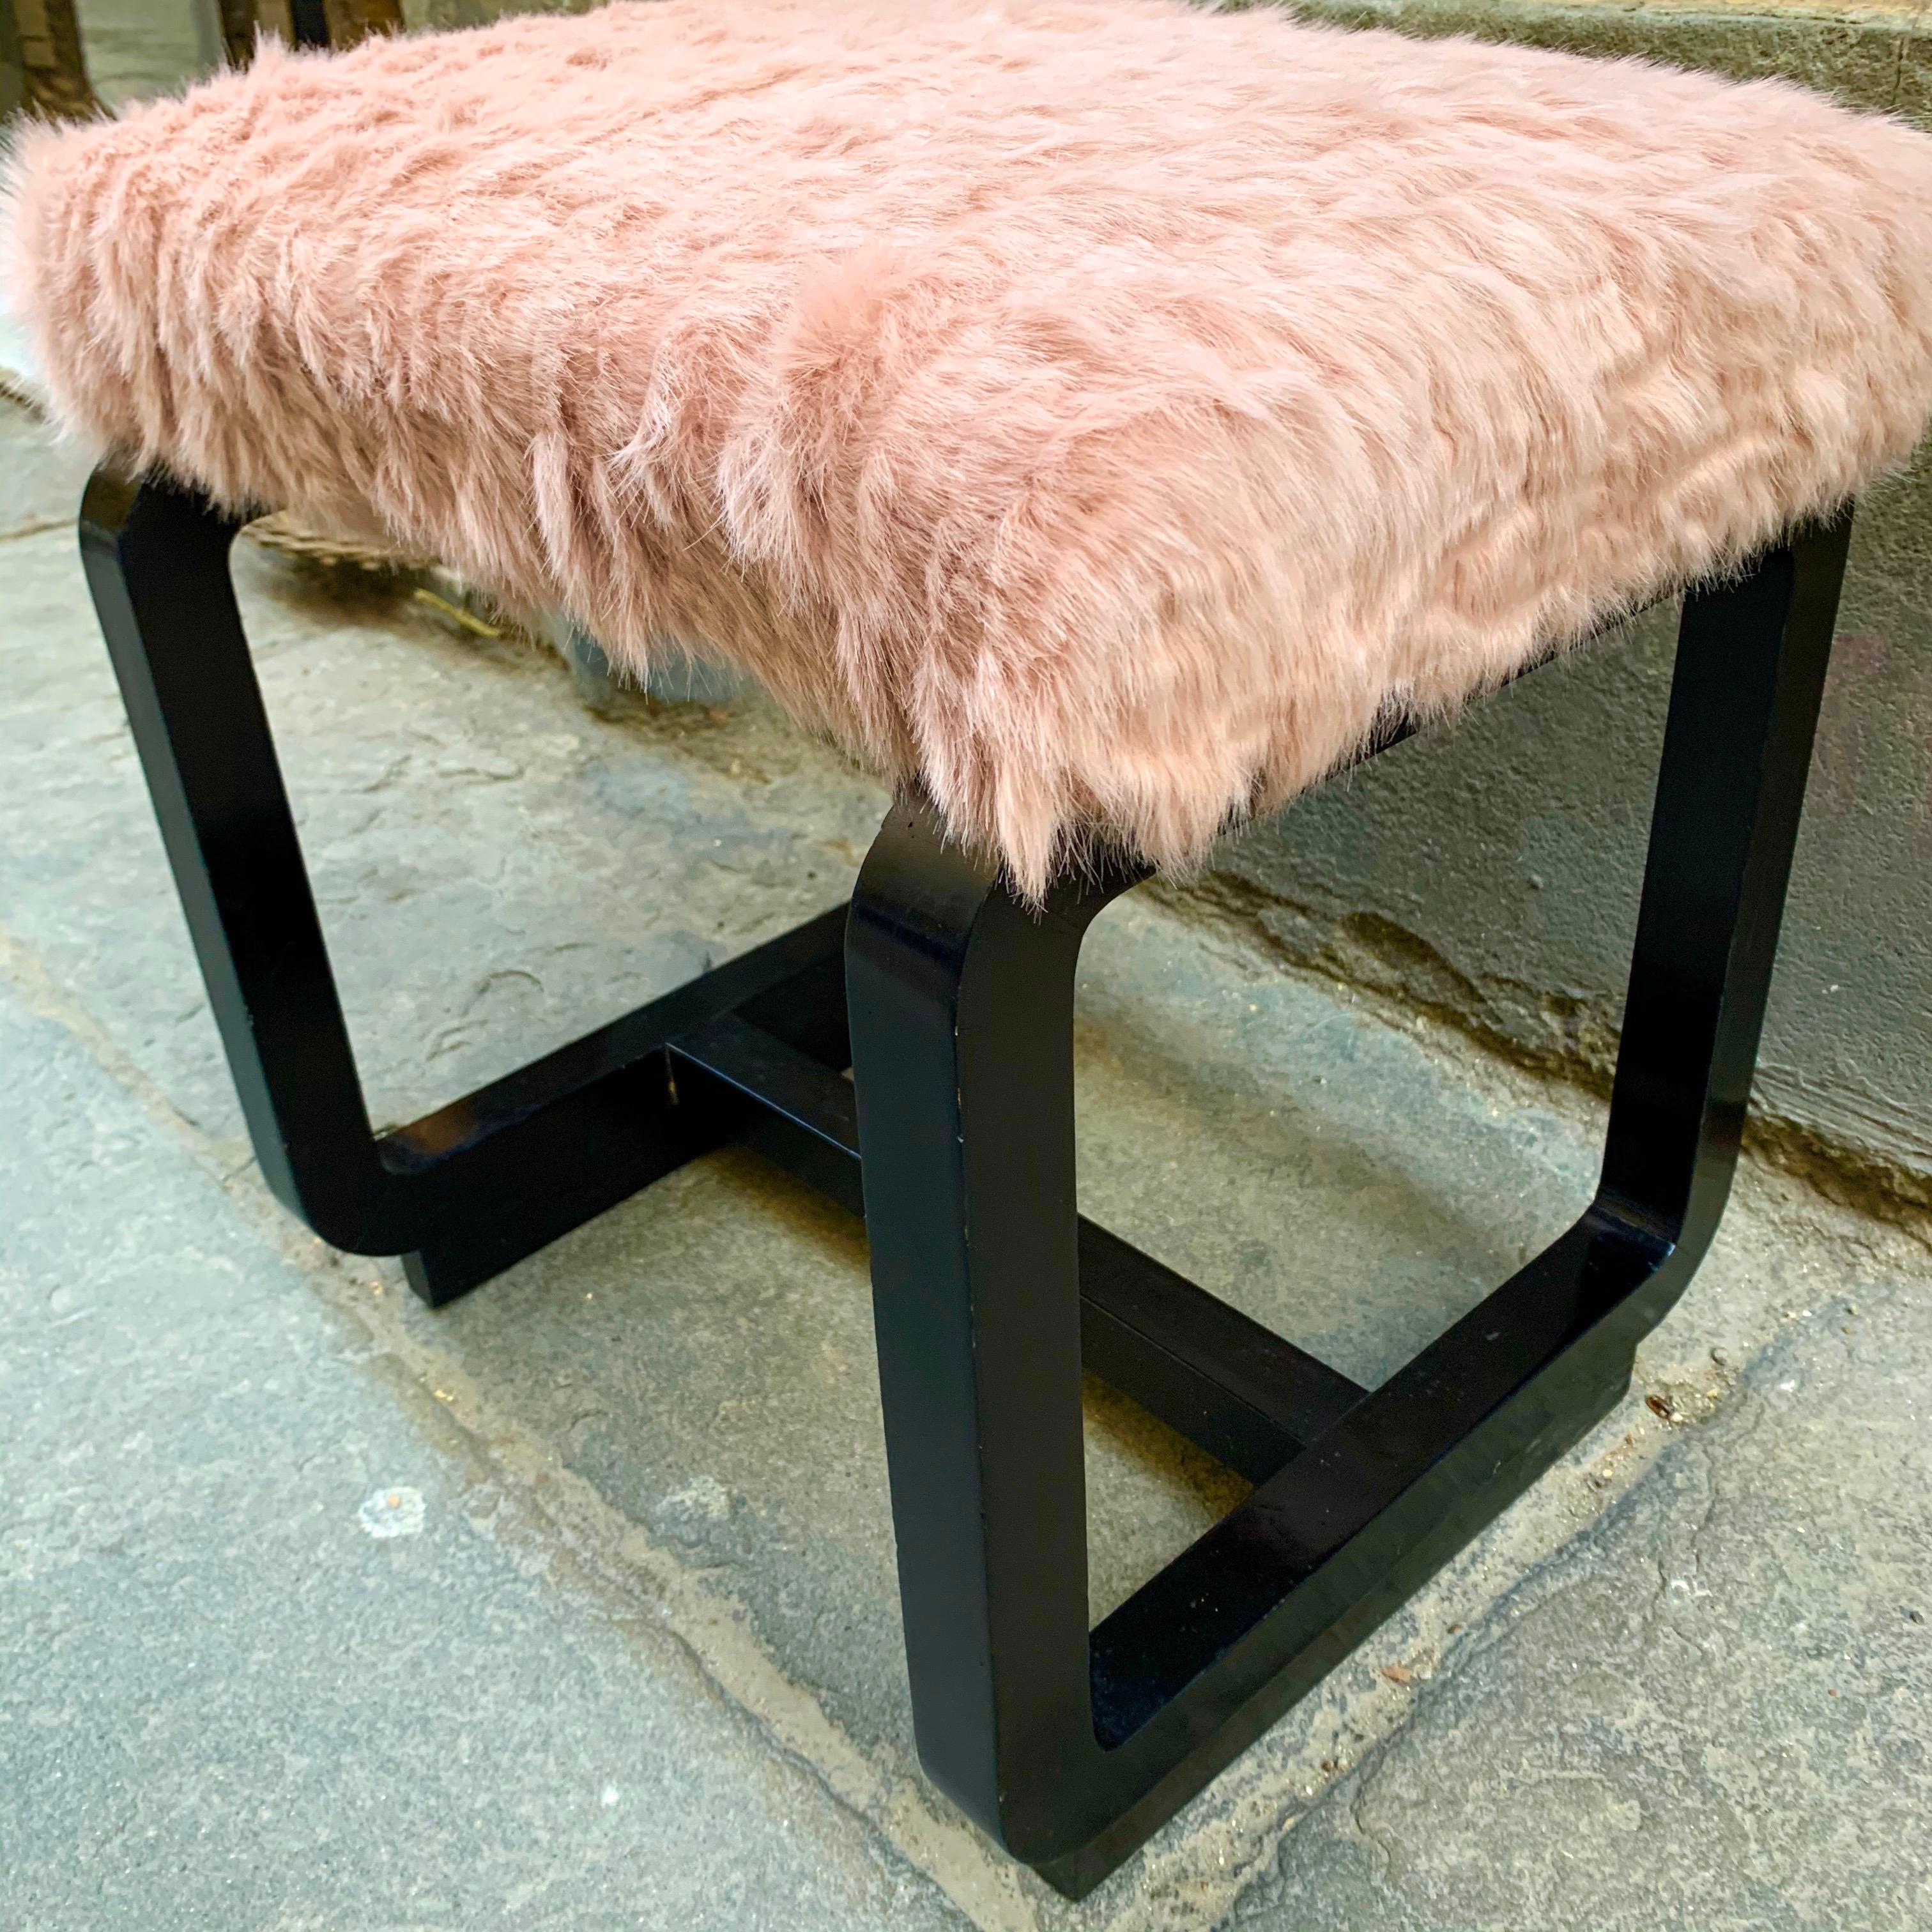 Pair of Deco Benches in Black Lacquered Wood and Pale Pink Eco Fur Seats, 1930 5